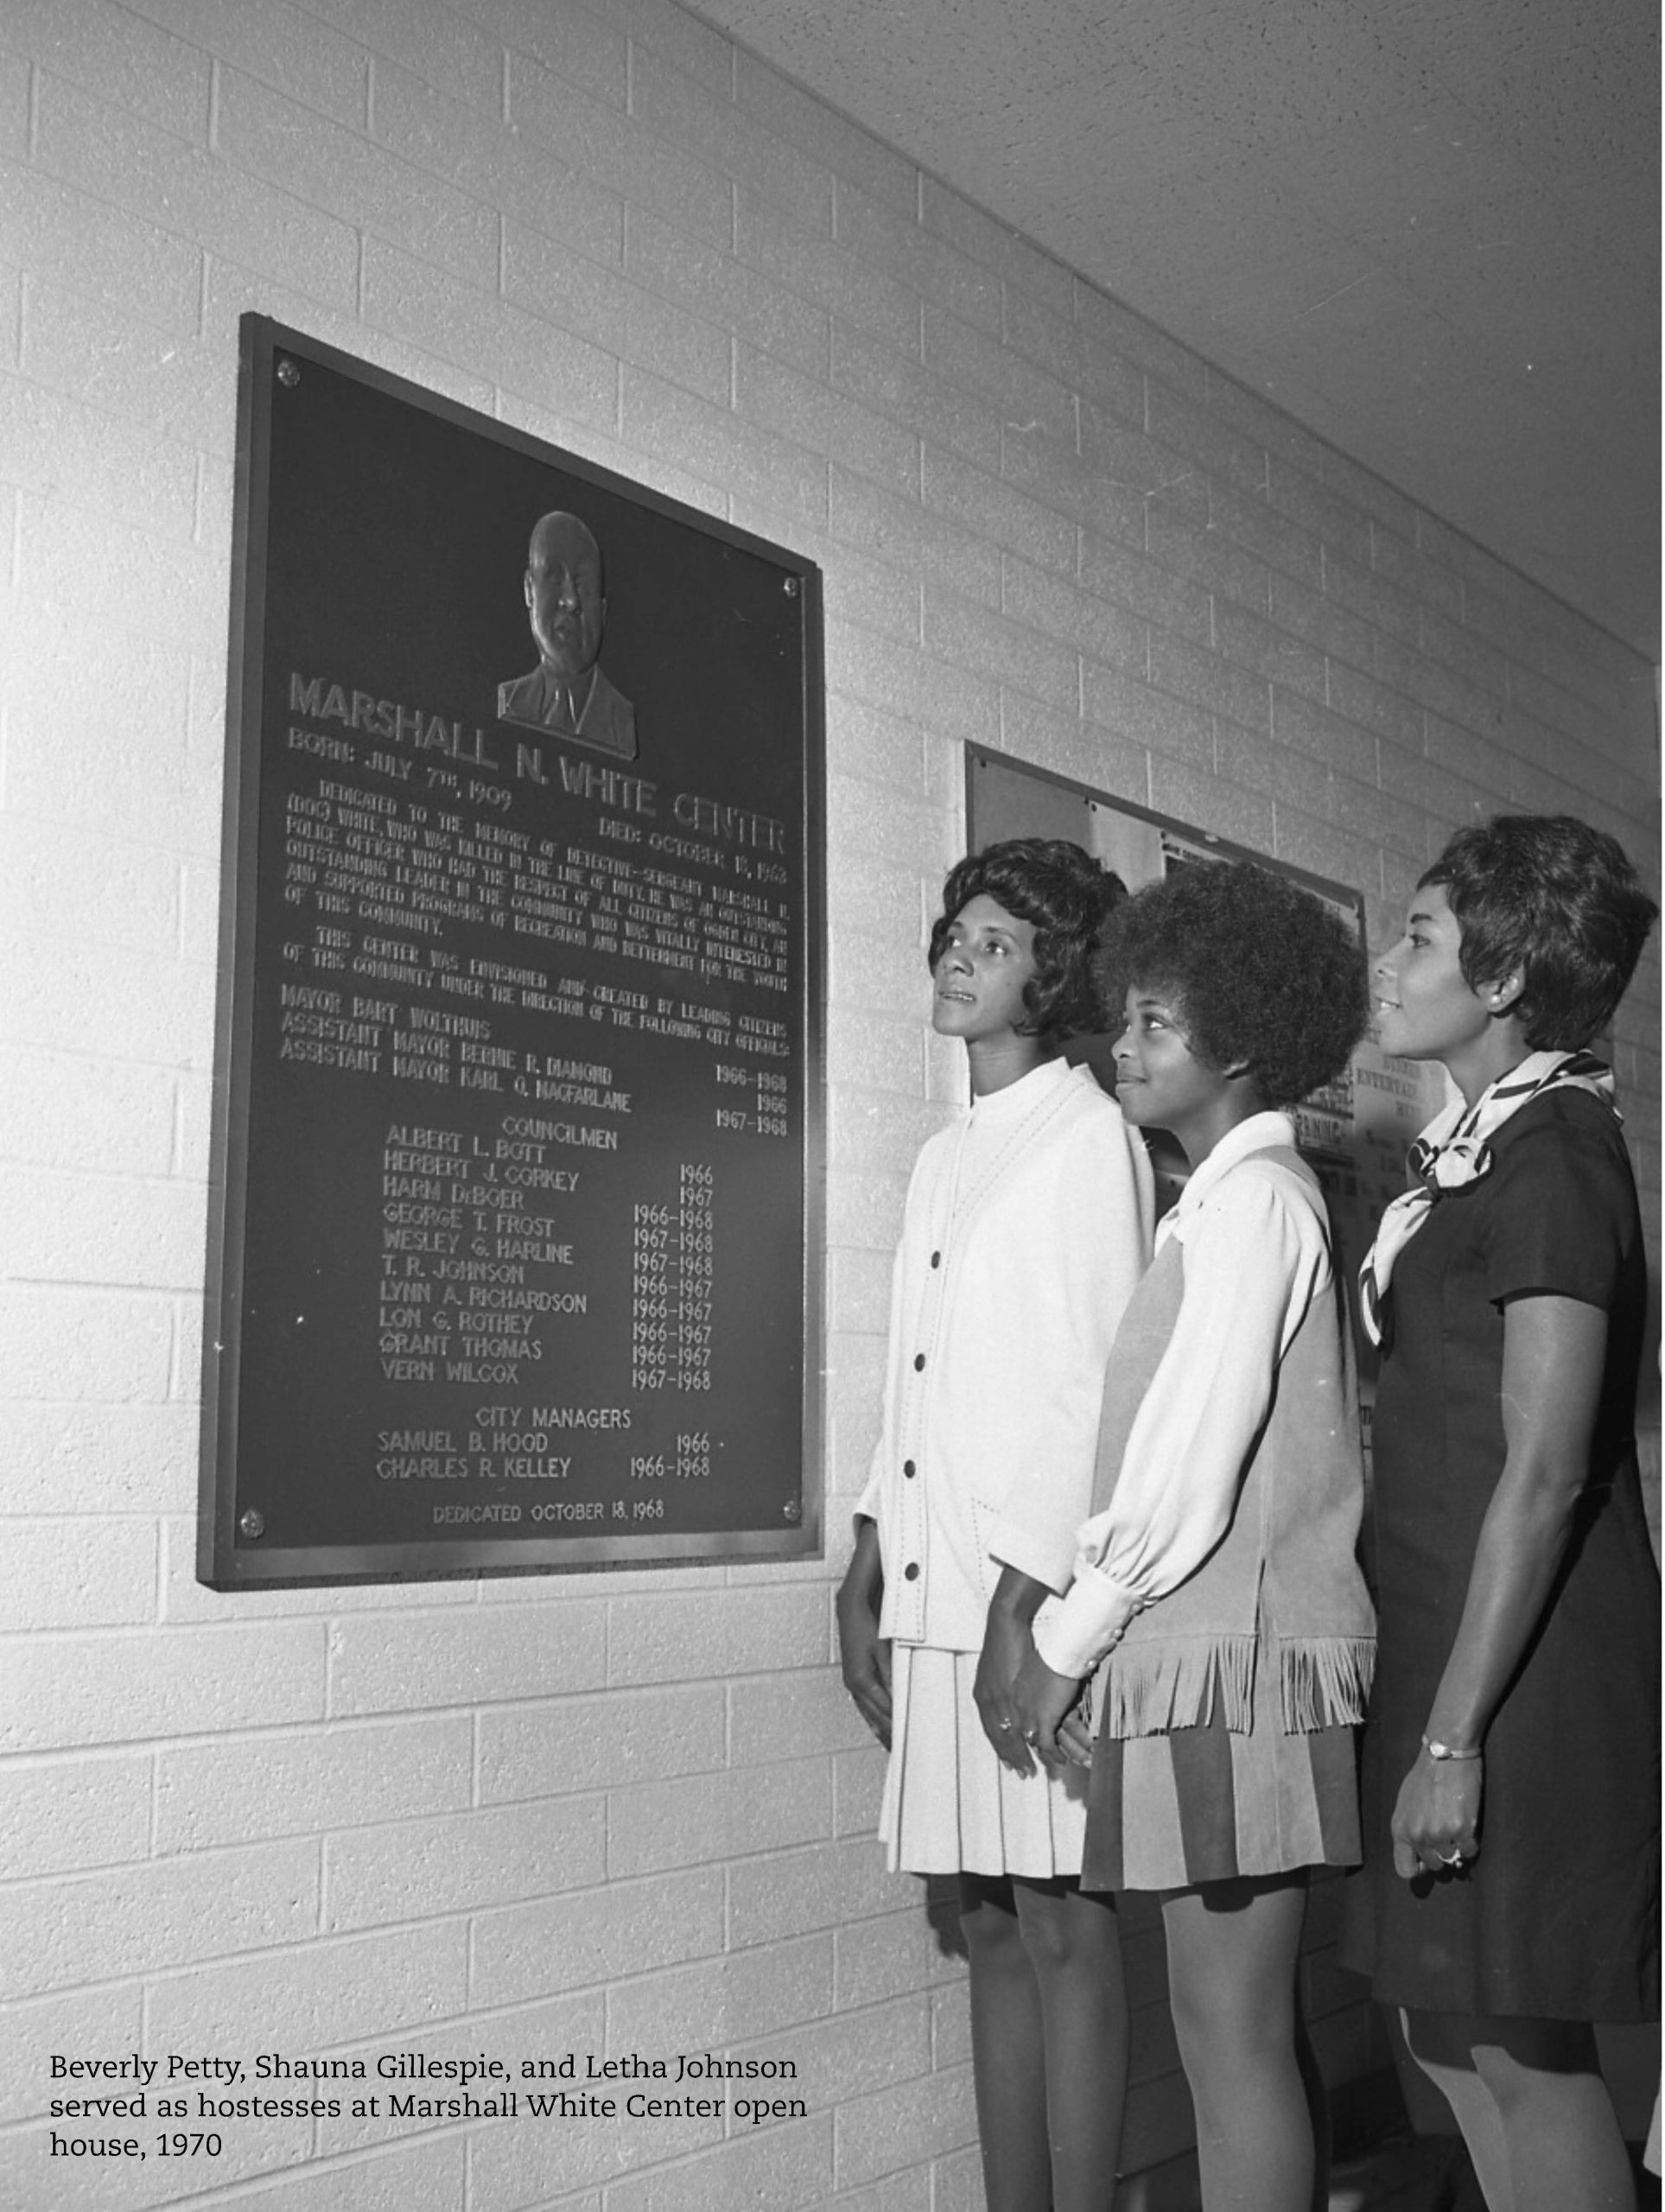 Beverly Petty, Shauna Gillespie and Letha Johnson served as hostesses at Marshall White Center open house, 1970.